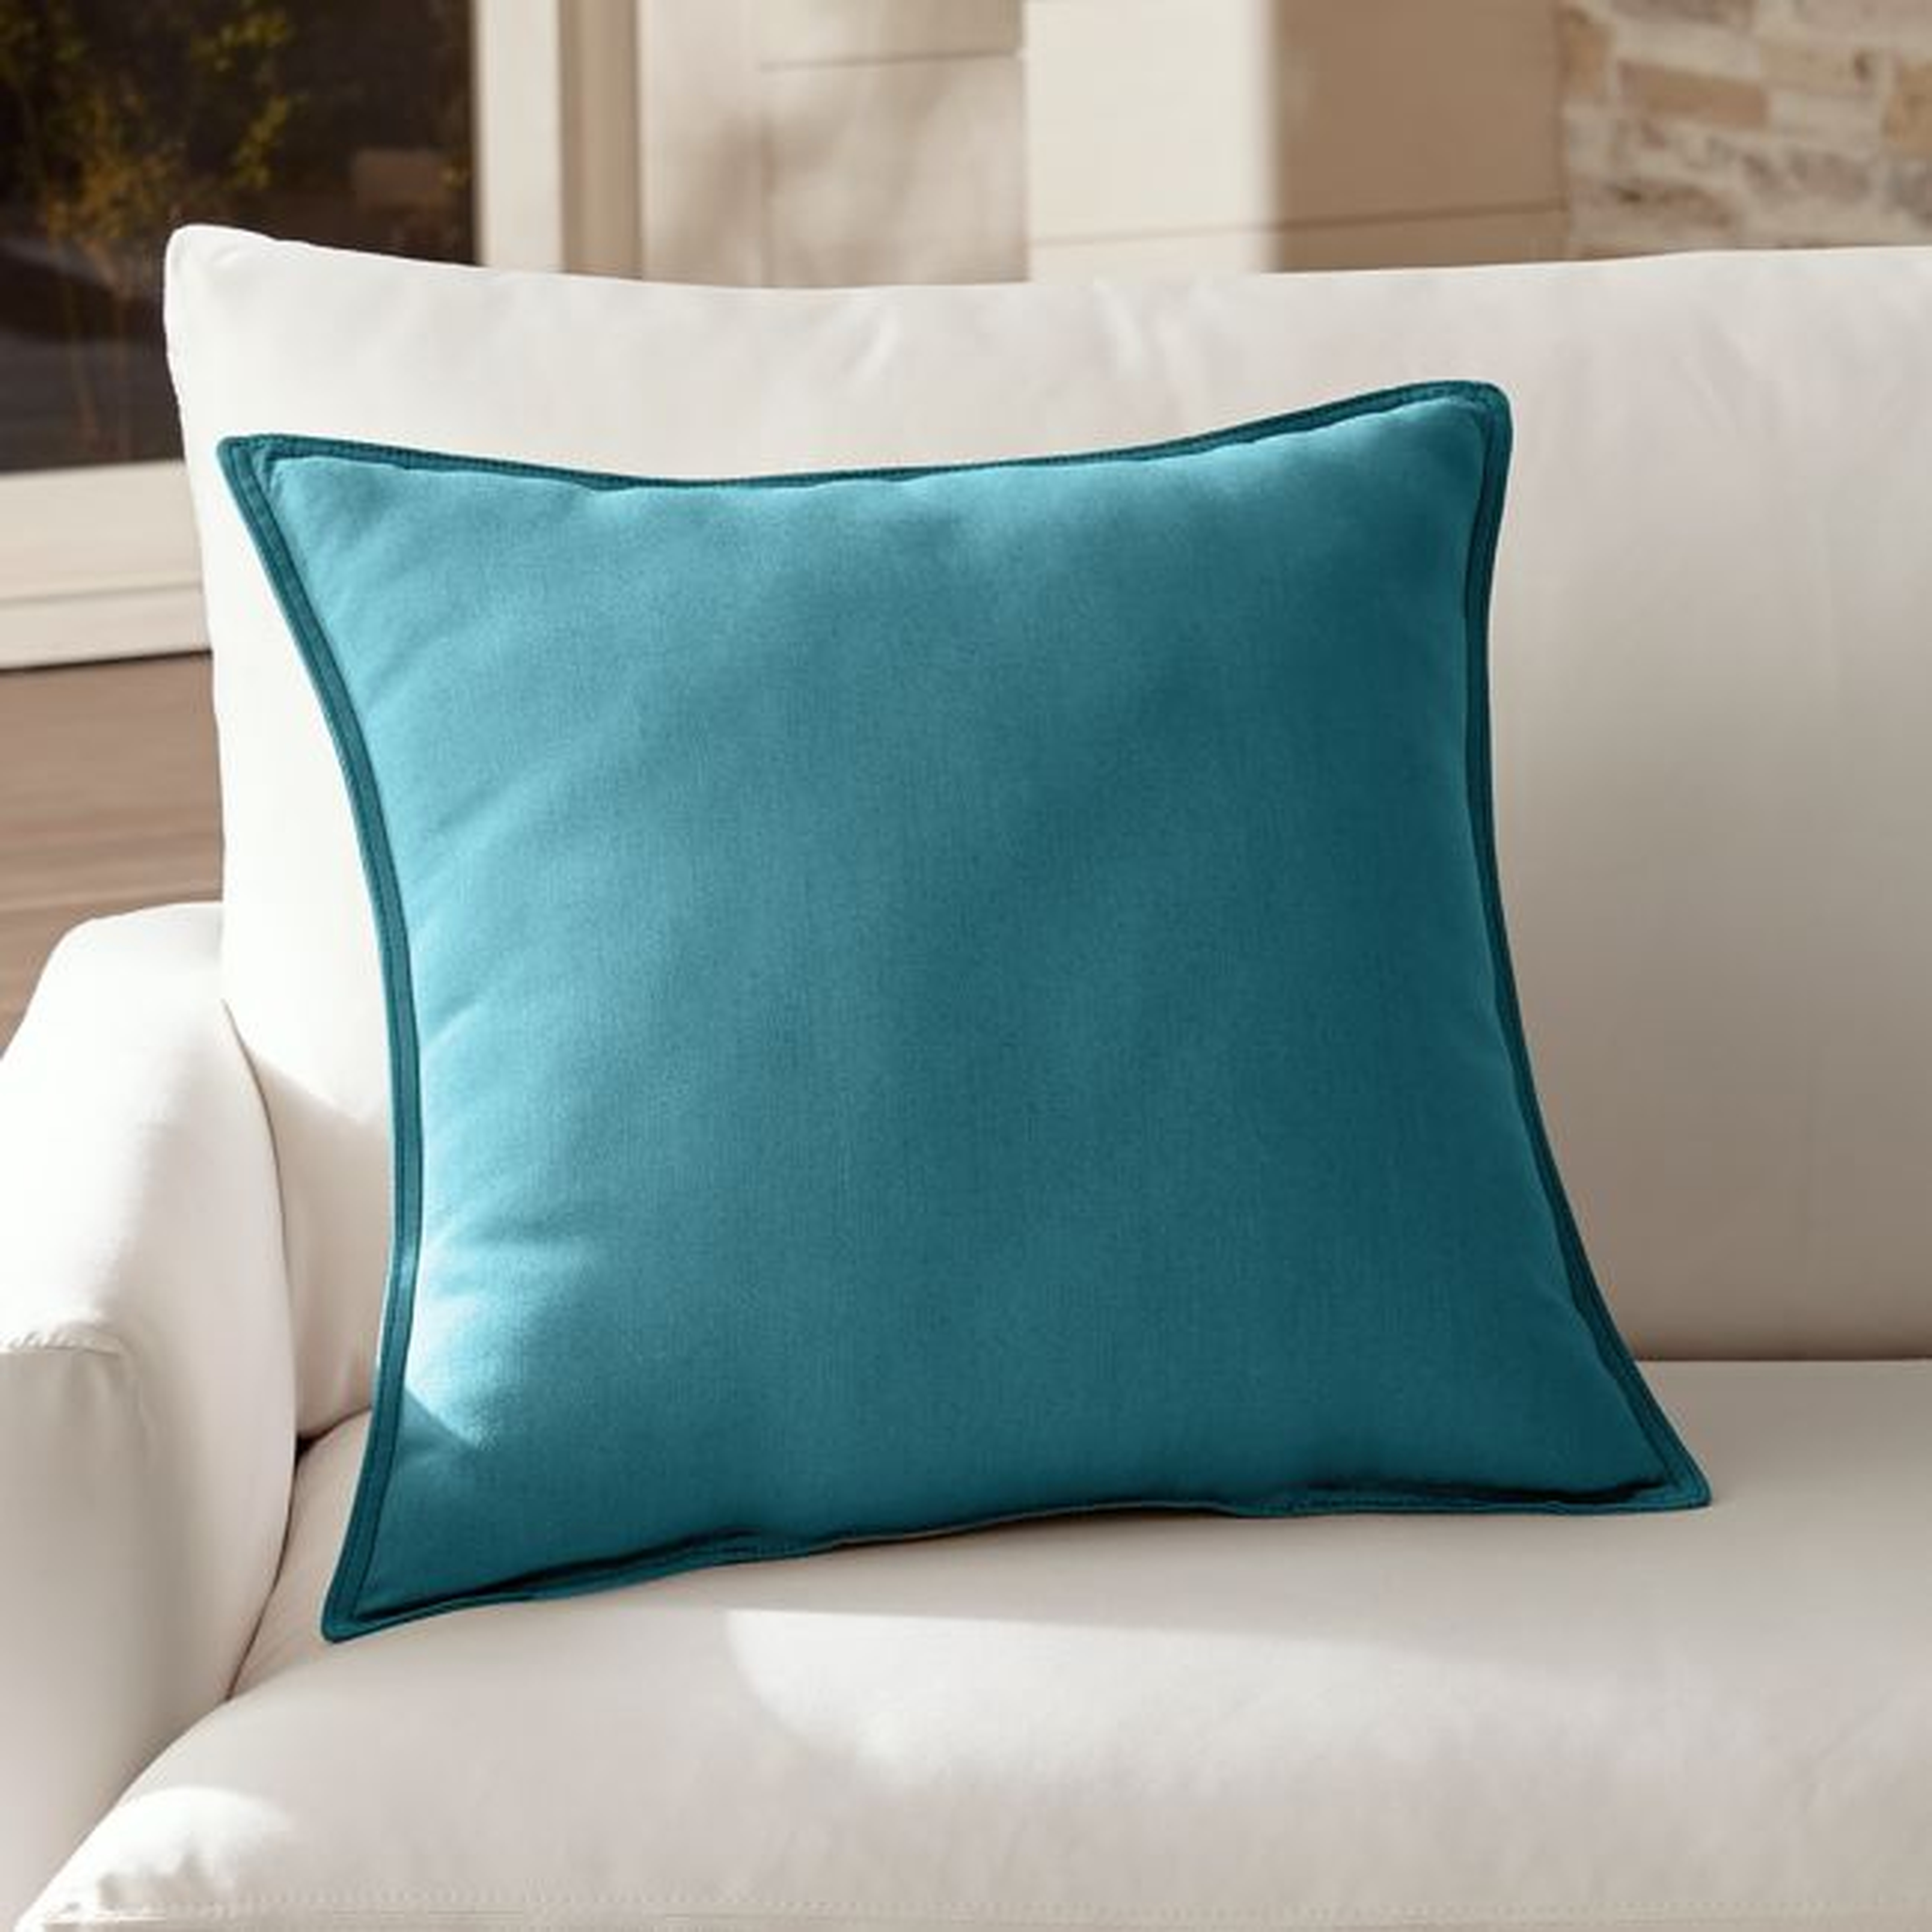 Sunbrella ® Bold Turquoise 20" Outdoor Pillow - Crate and Barrel